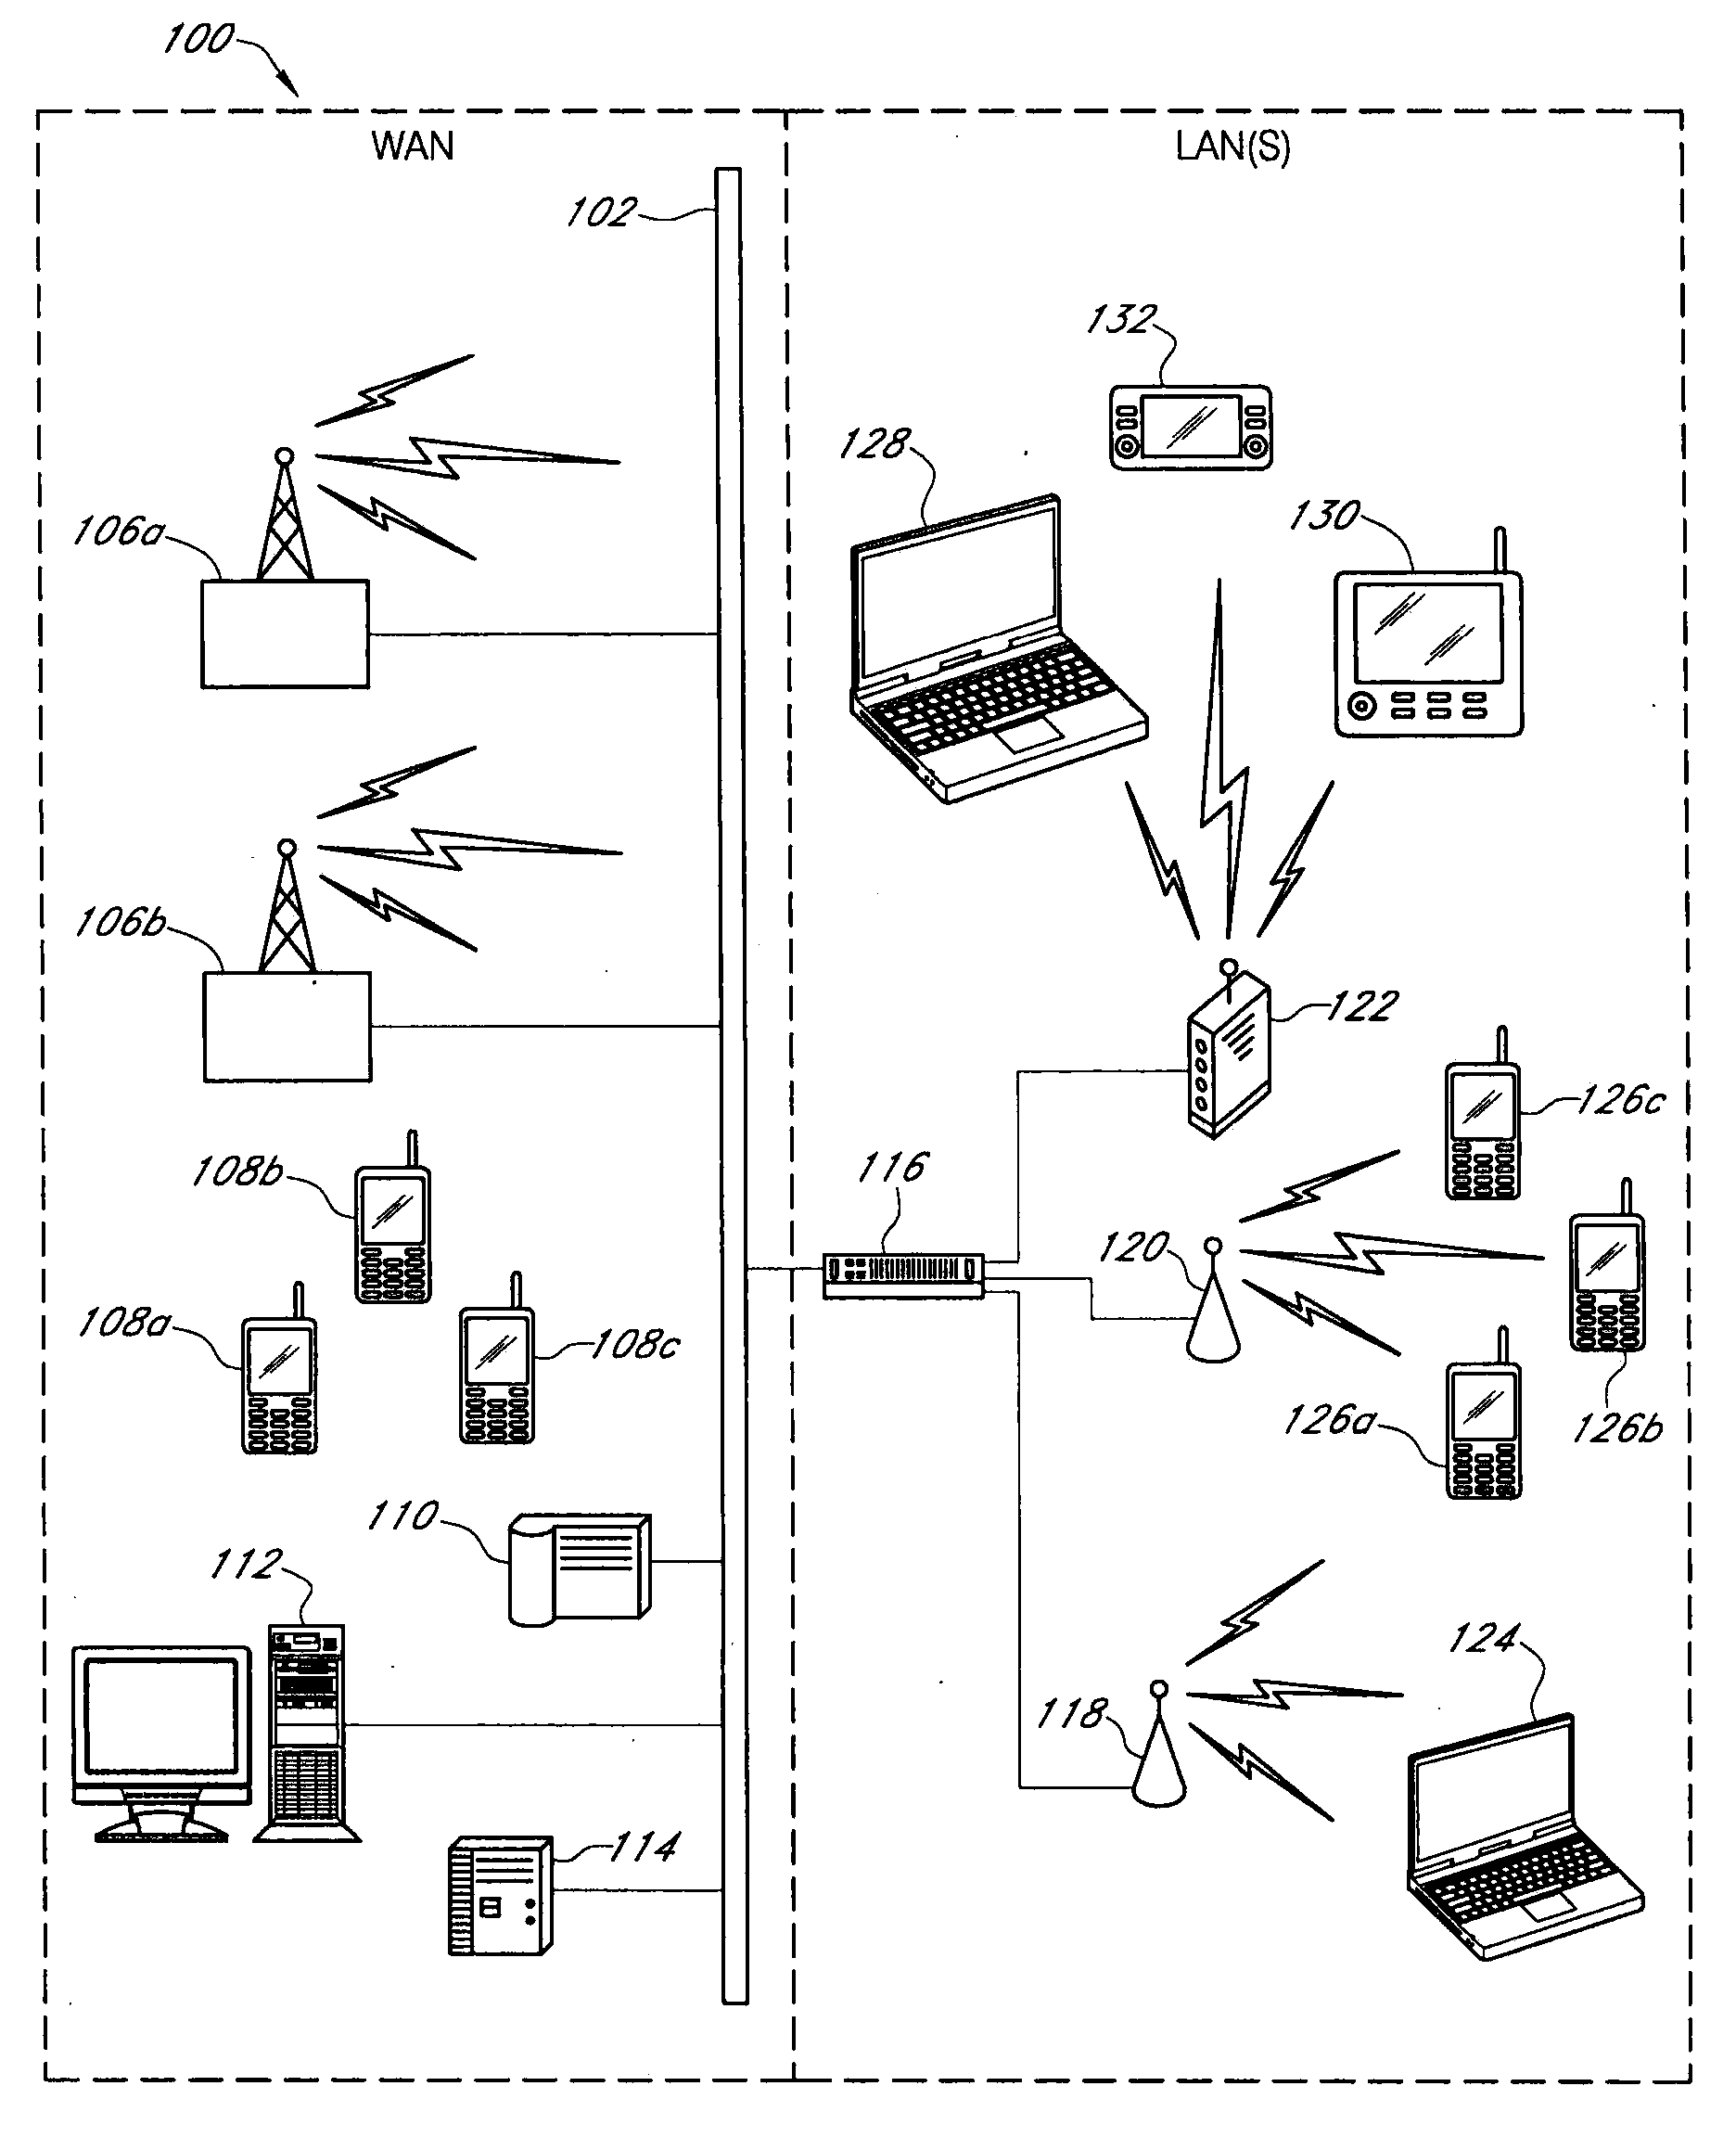 Systems and methods for optimizing channel resources by coordinating data transfers based on data type and traffic